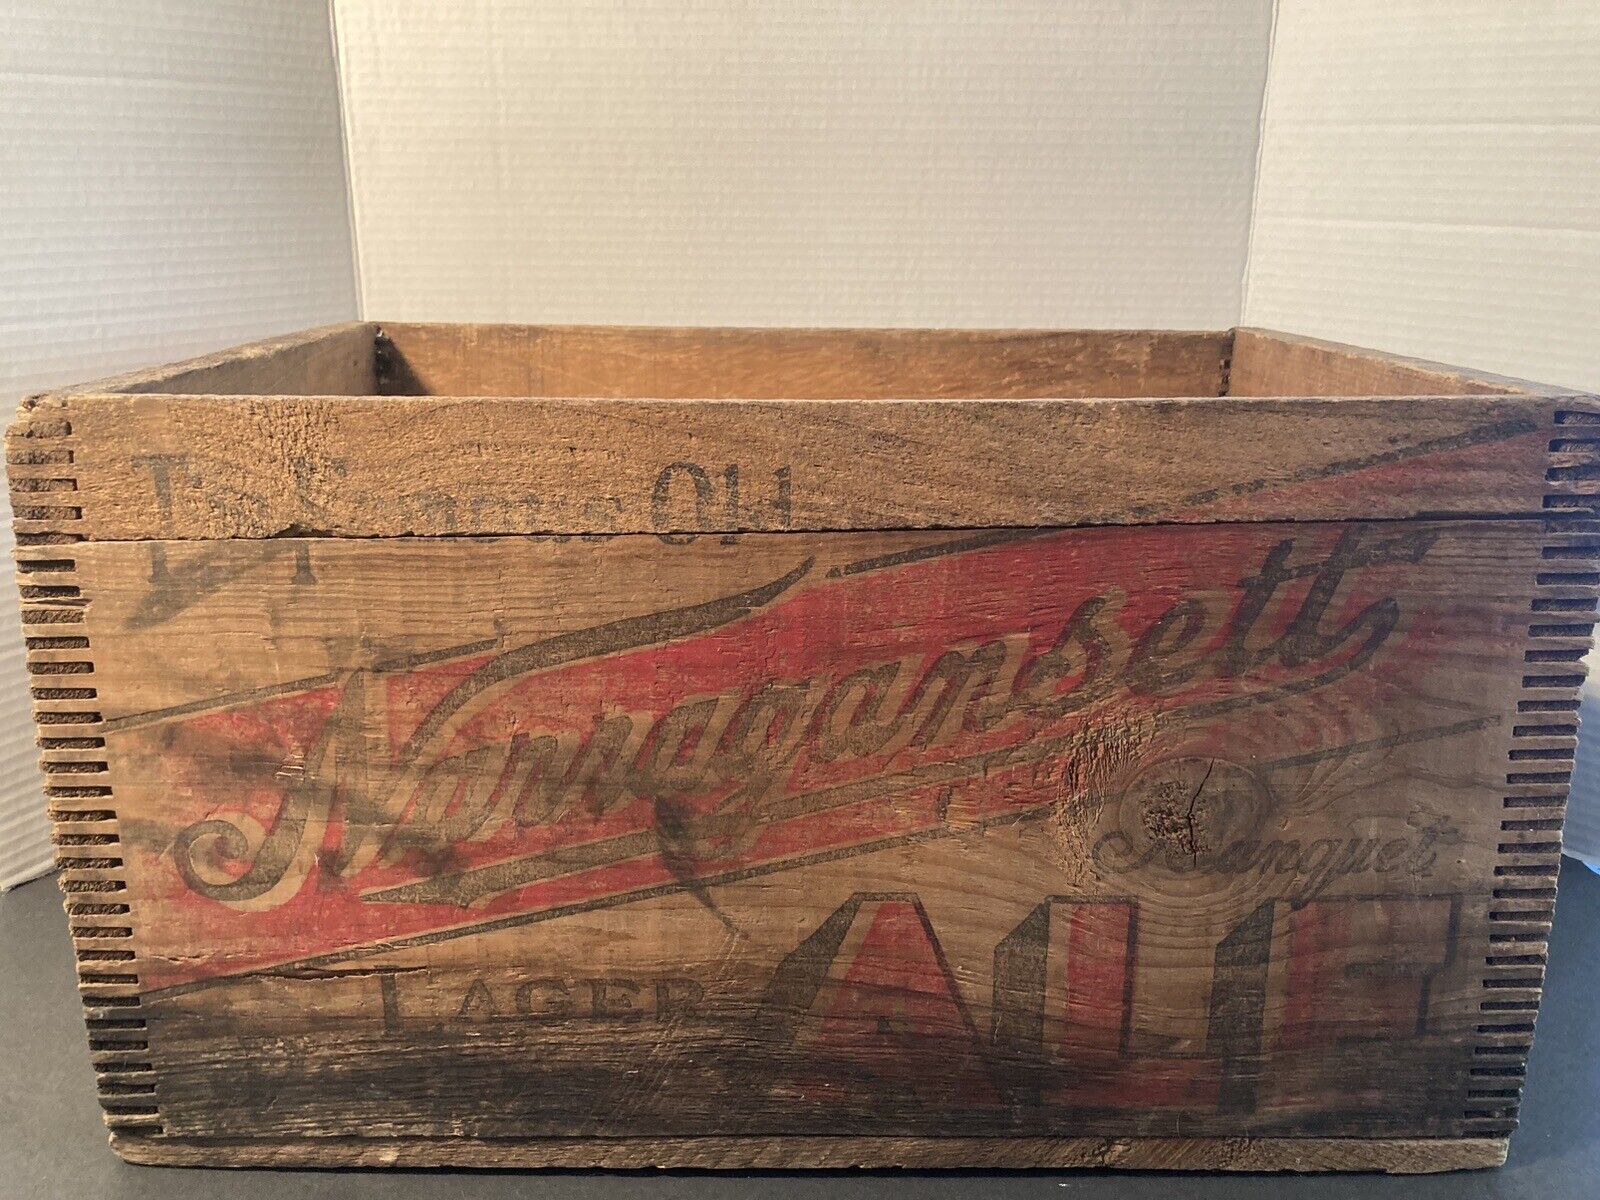 Narragansett Beer Dovetail Joints Wooden Box Brewery Crate